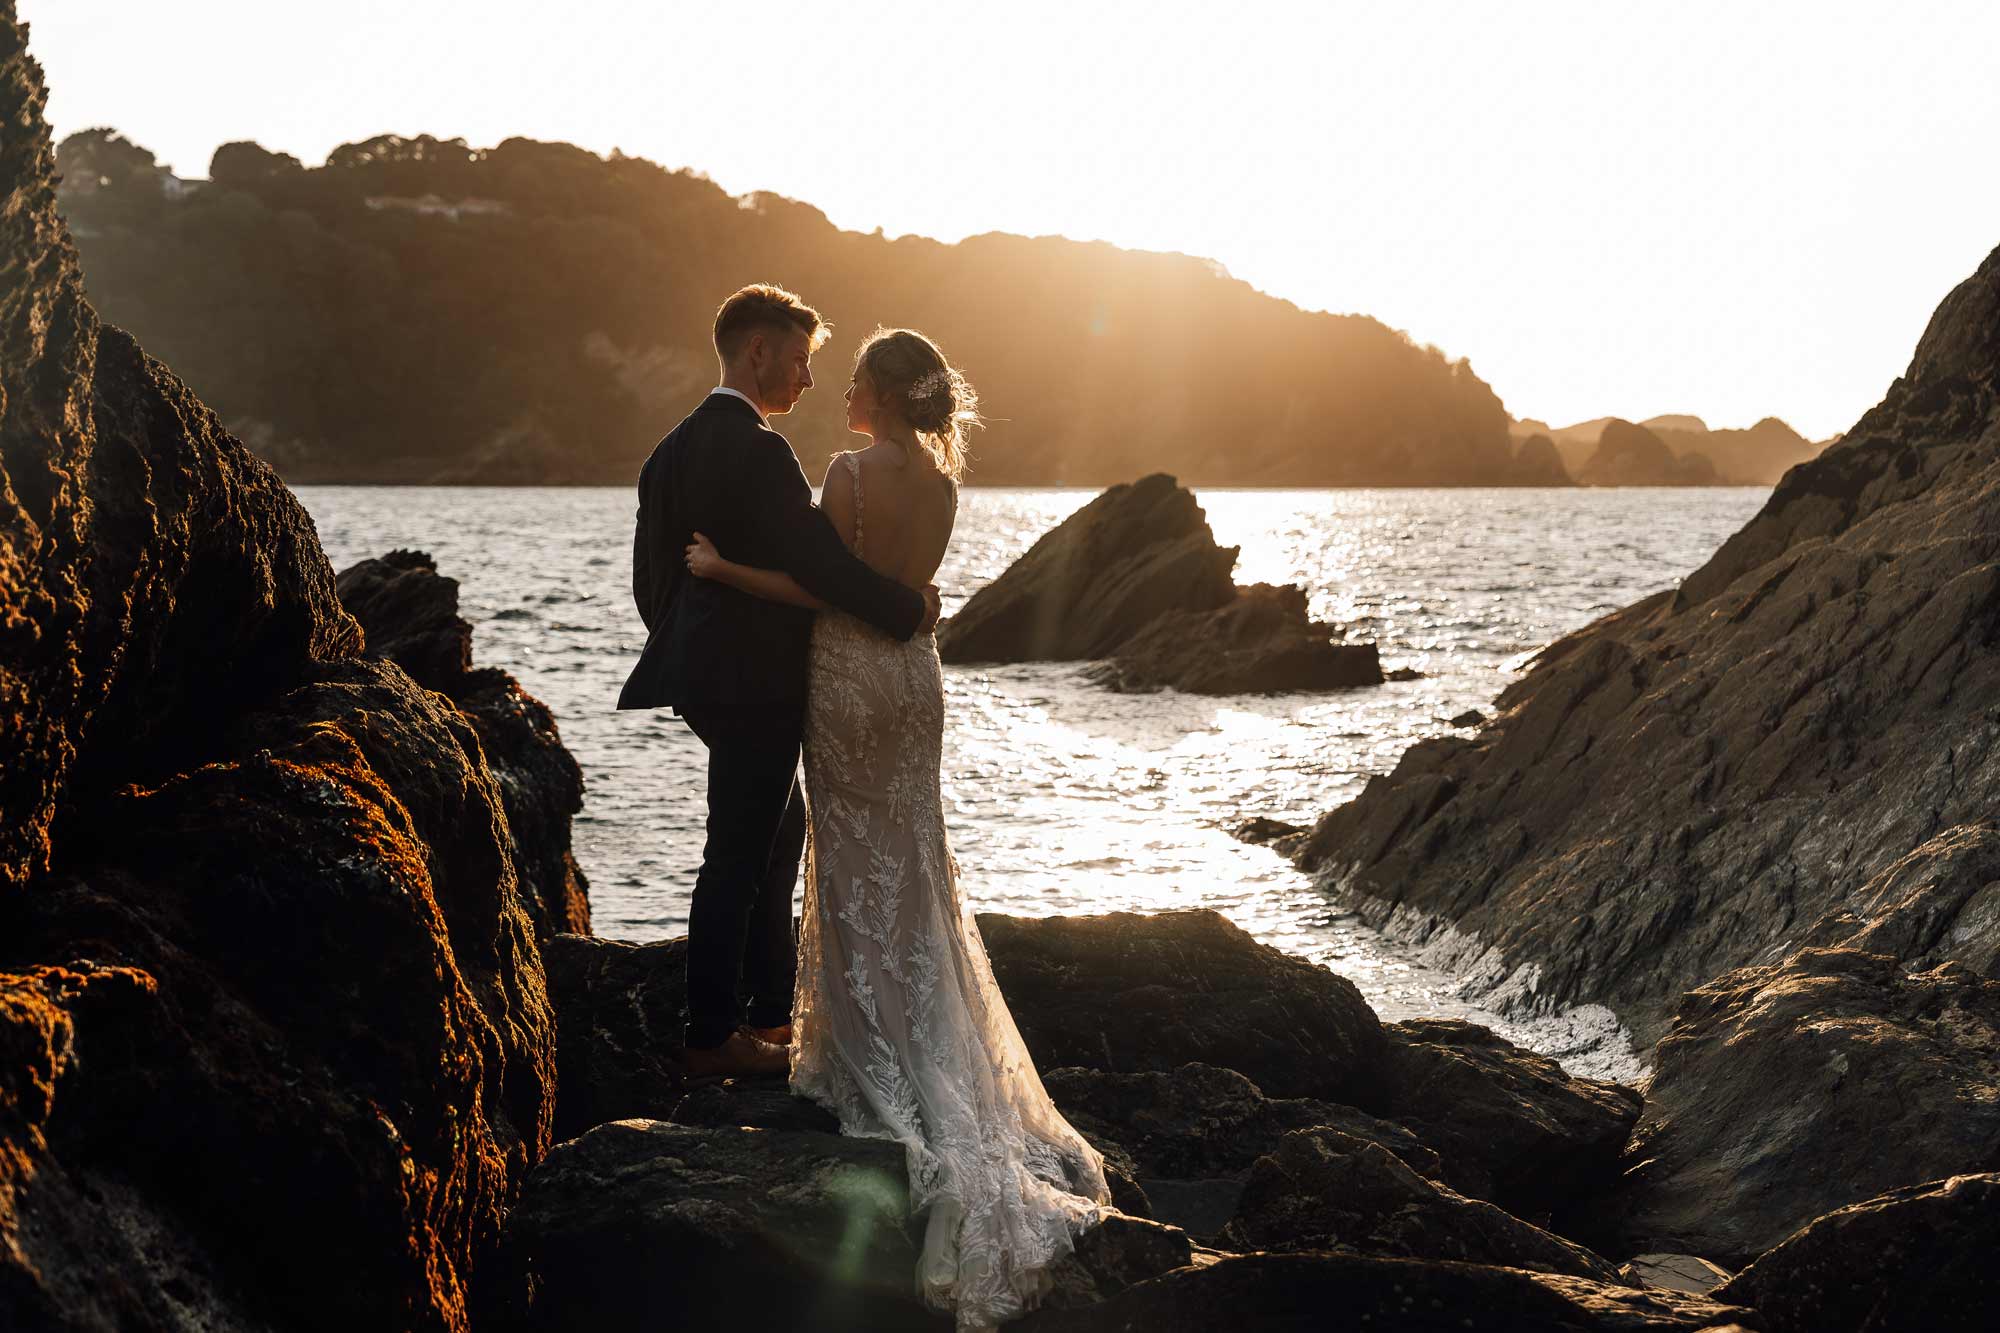 Bride and groom looking at each other while satnding on rocks overlooking sandy cove